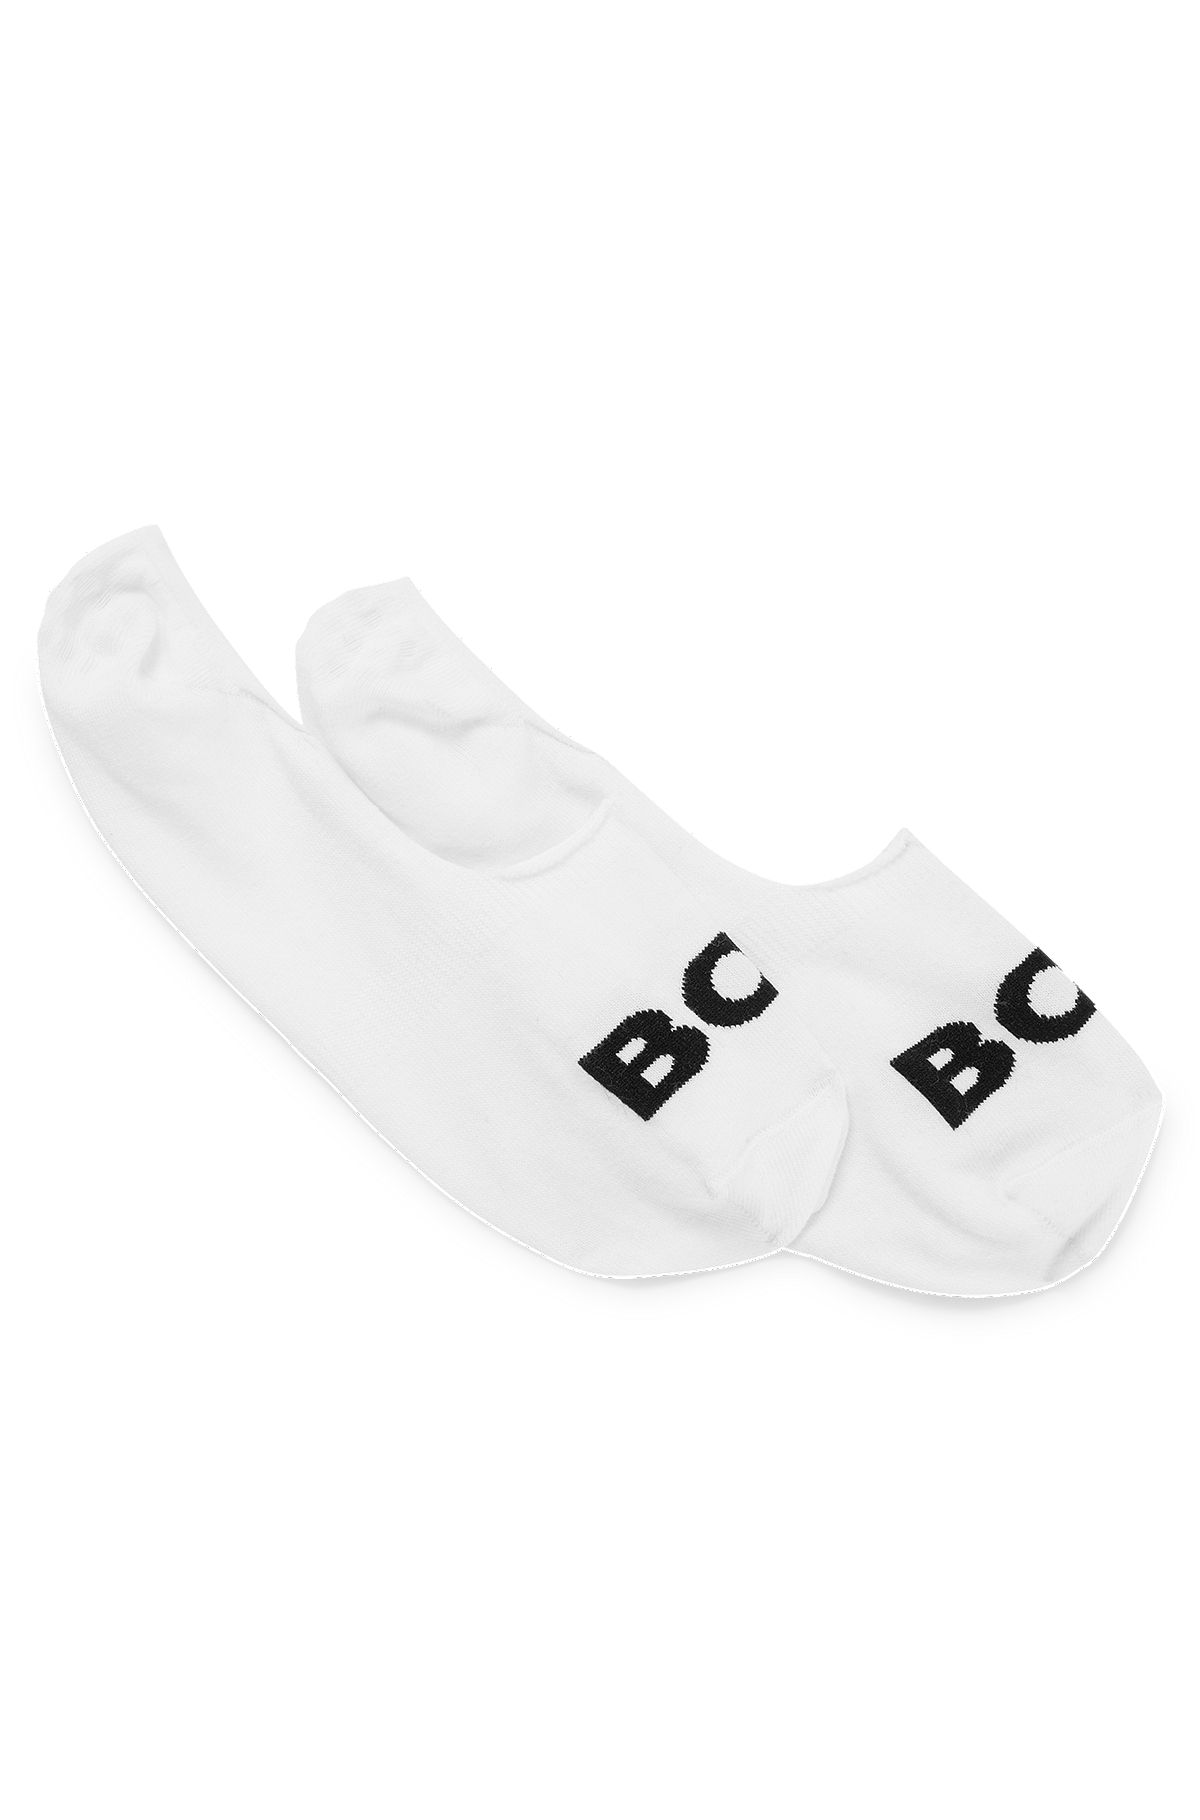 Two-pack of invisible socks in a cotton blend, White